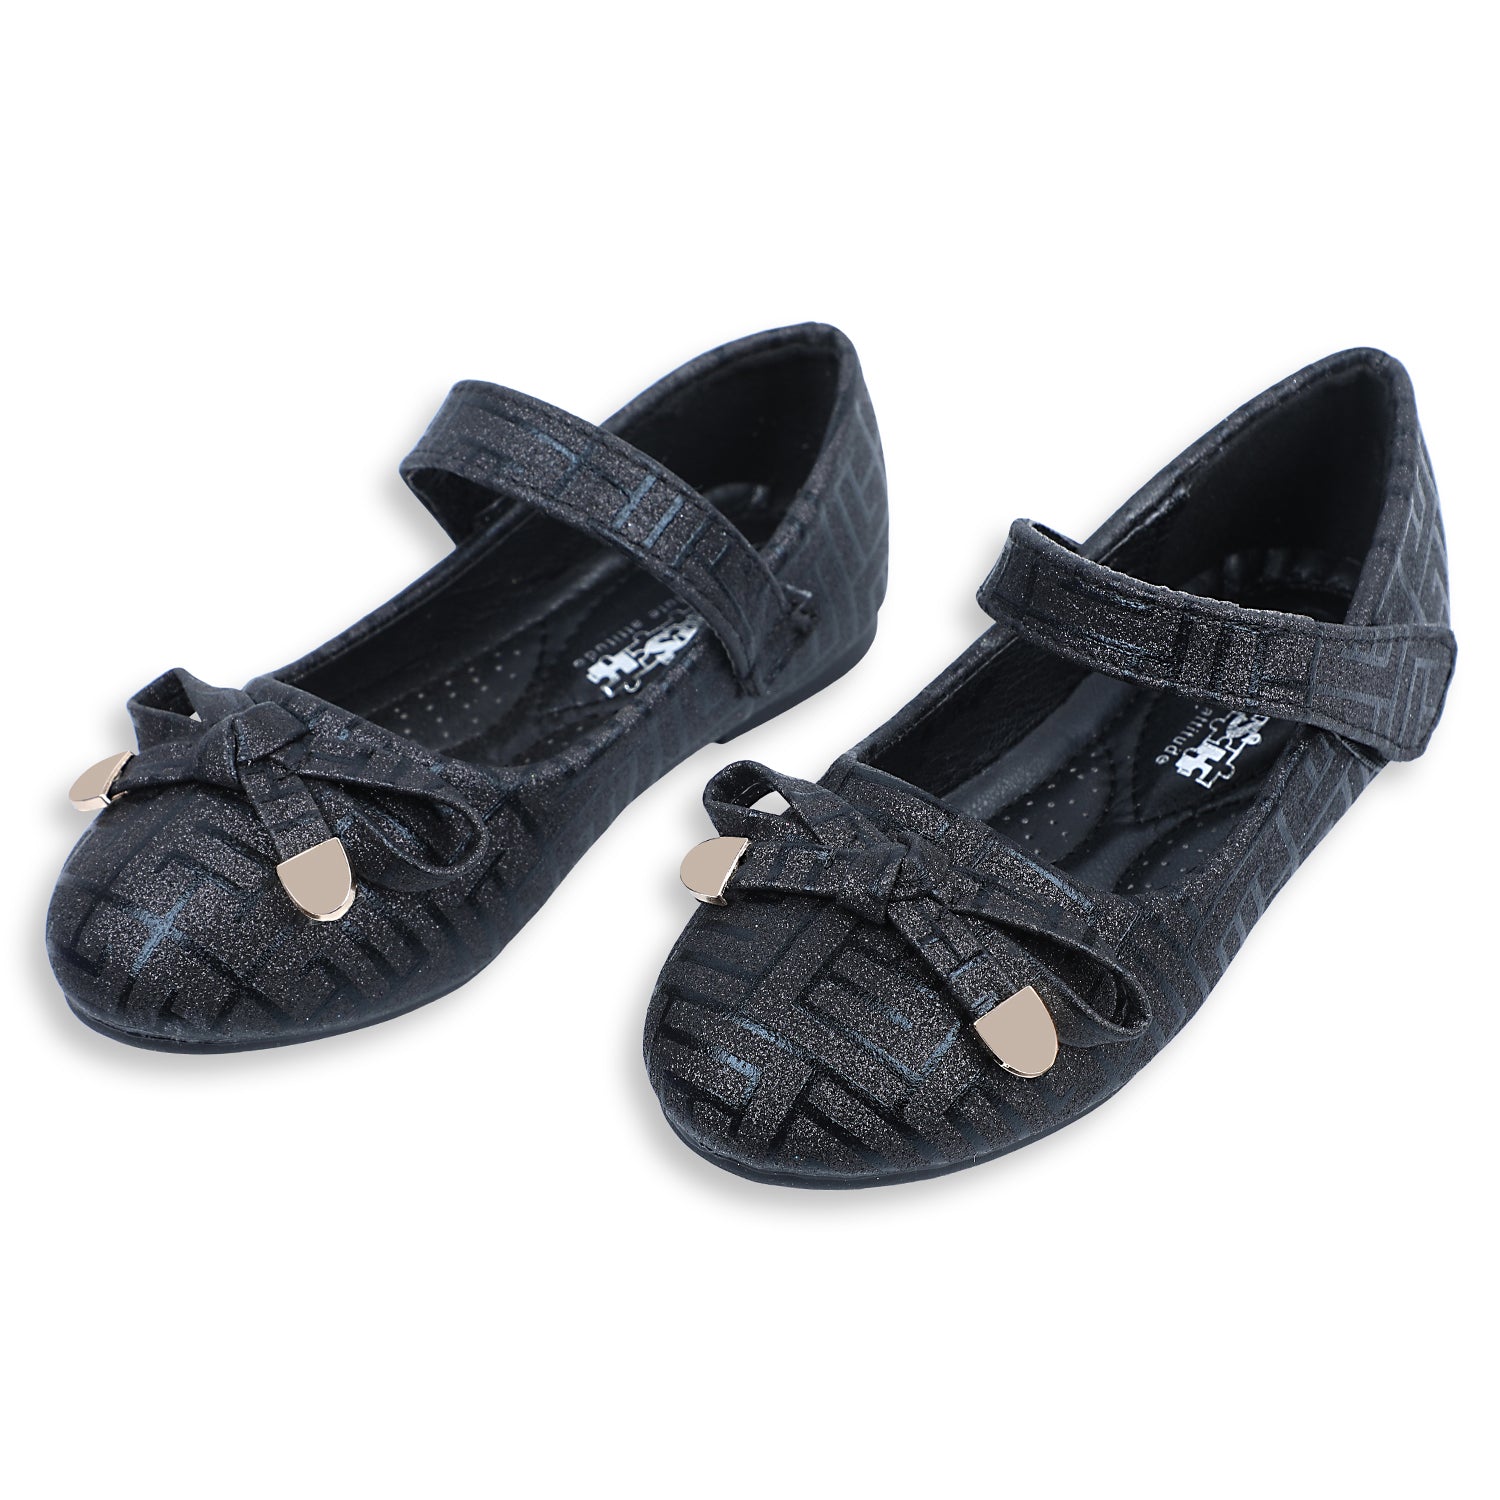 Baby Moo x Bash Kids Embellished Shimmer With Bow Mary Jane Ballerinas - Black